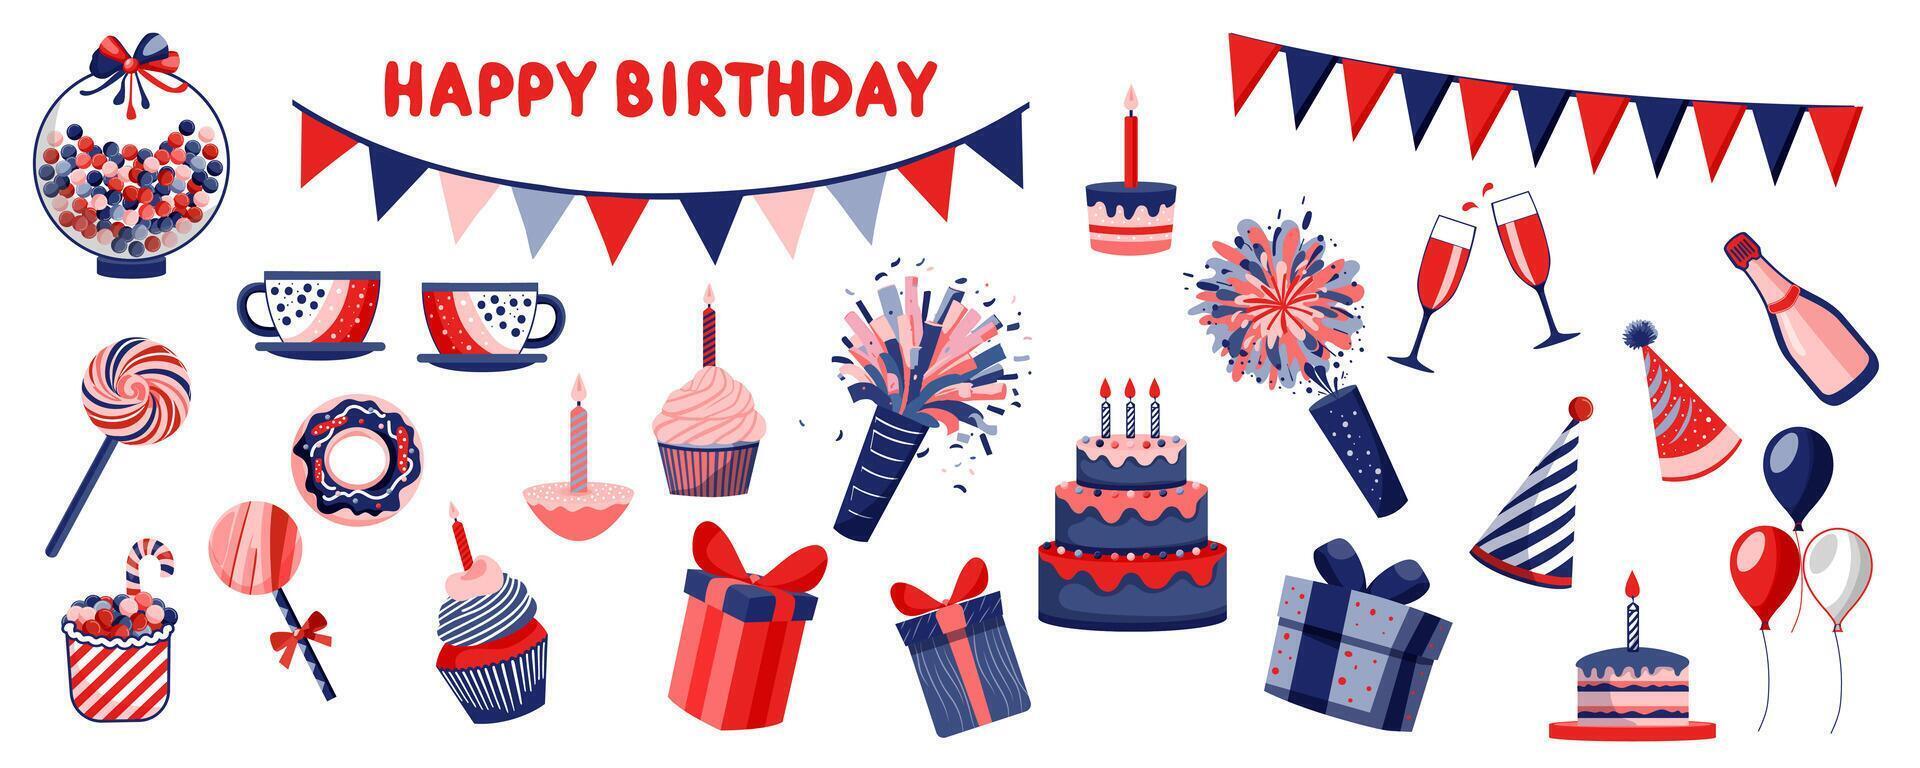 Happy birthday mega set in flat graphic design. Bundle elements of garlands, cakes with candles, celebration cupcake, champagne, festive hats, candy, gifts, other. Vector illustration isolated objects